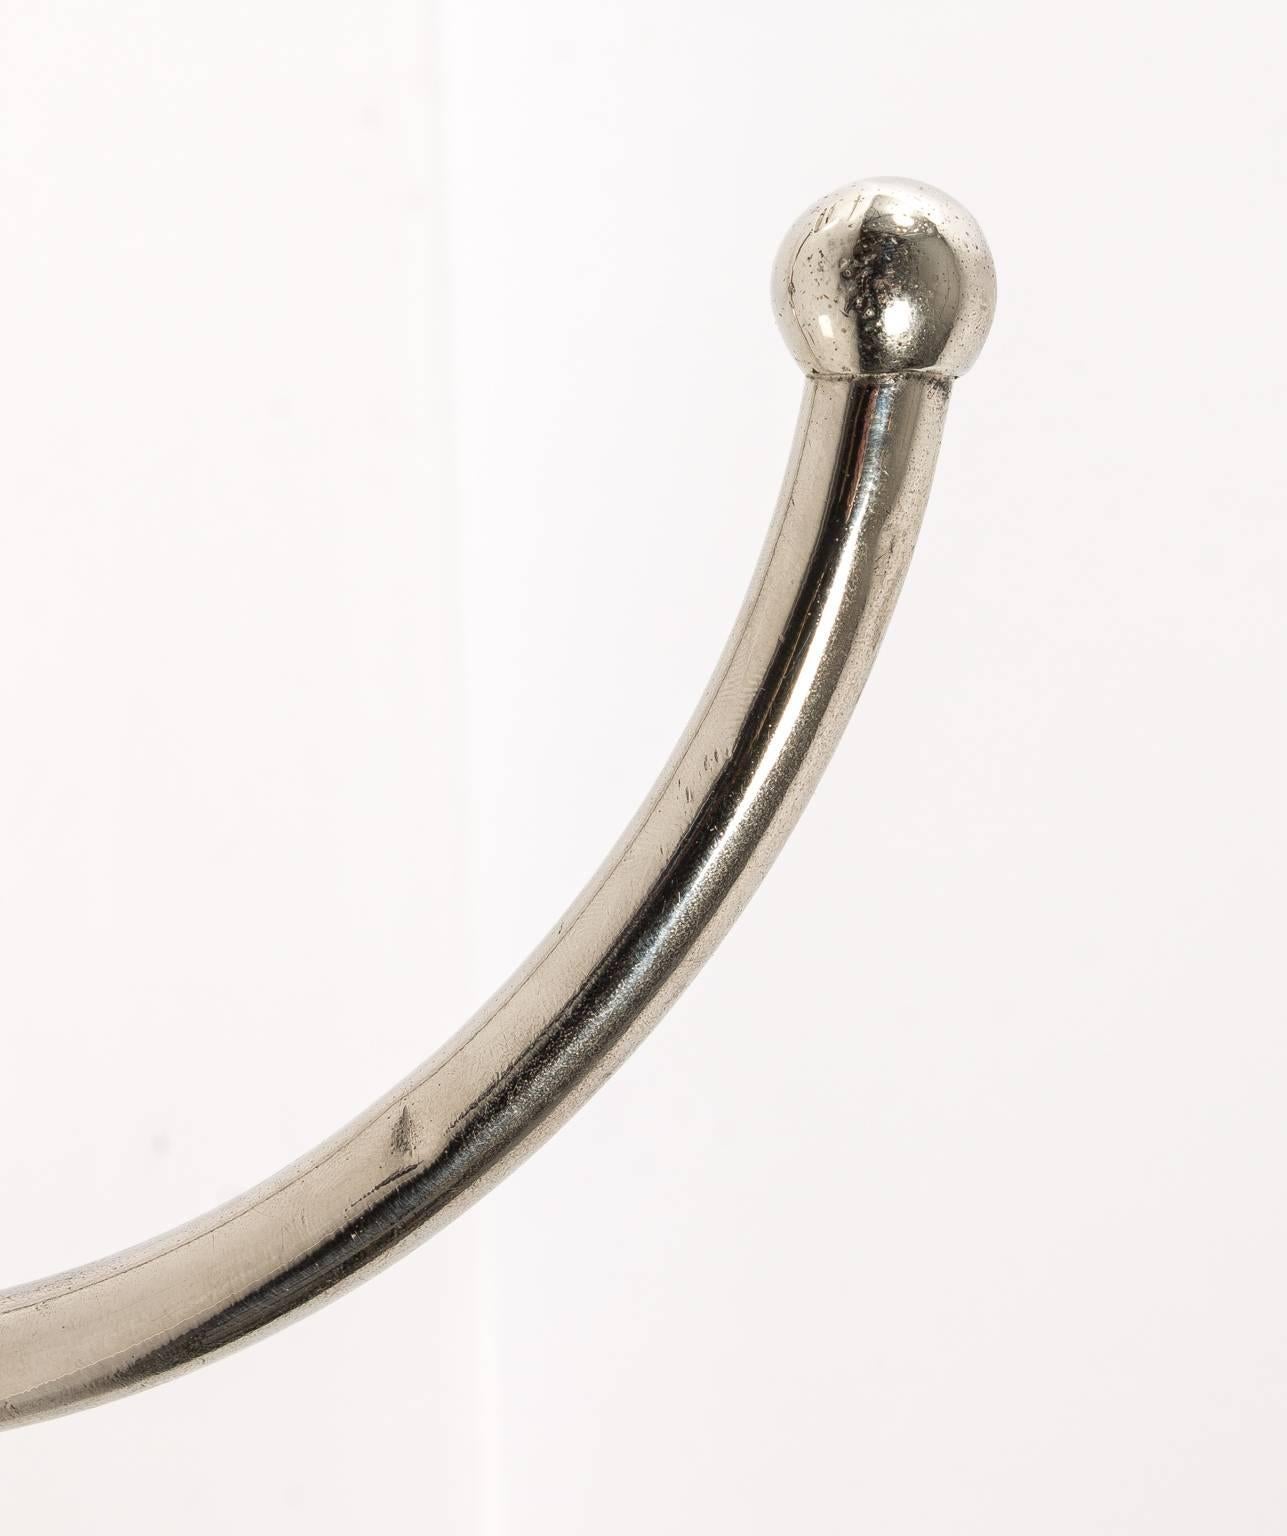 Very large, dramatic towel hook. Two available, sold separately.